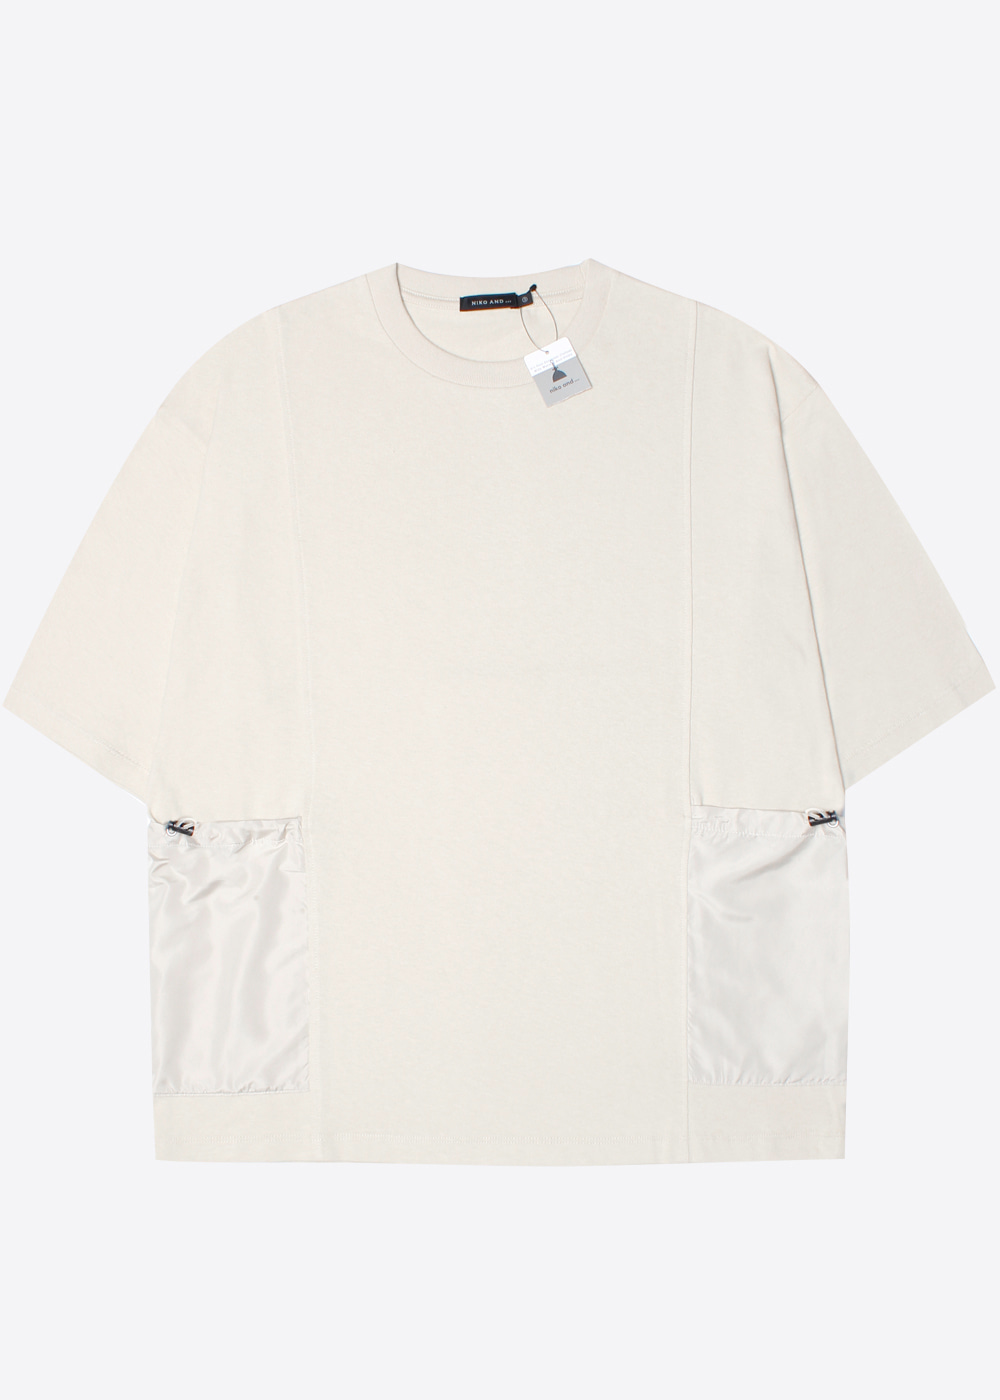 NIKO AND’over fit’ cotton side pocket t-shirt